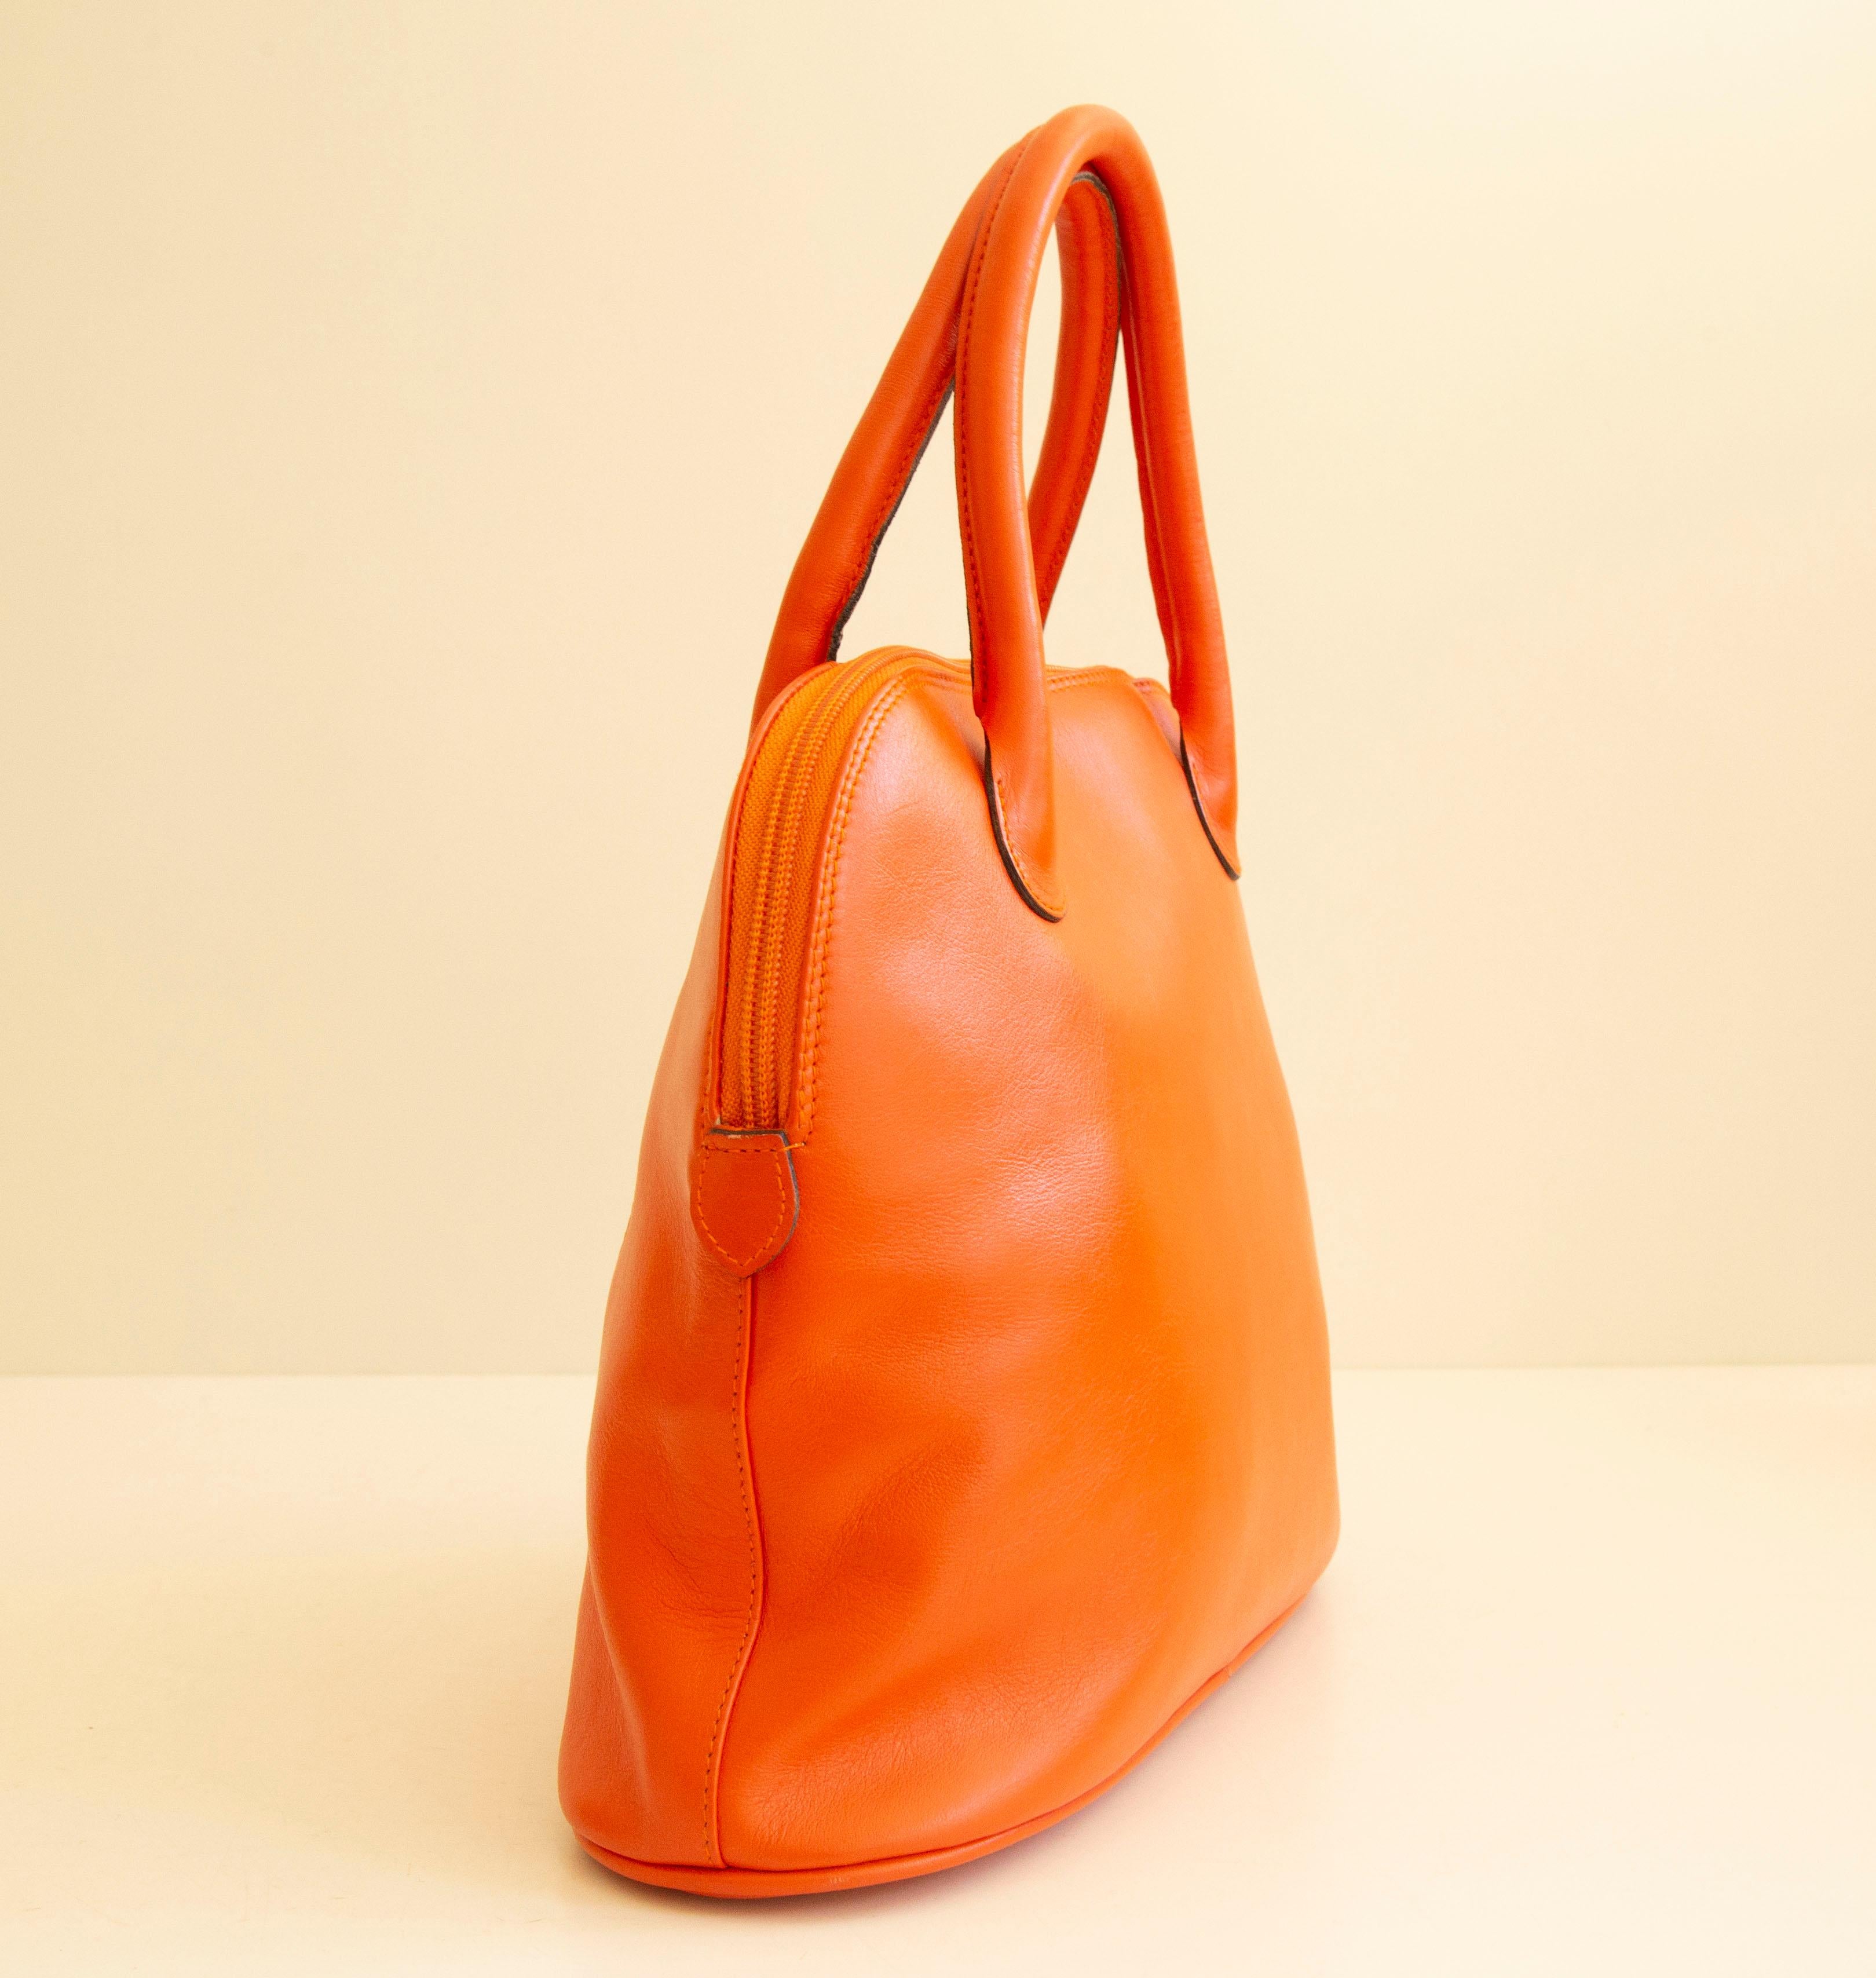 Paloma Picasso Top Handle Bag in Orange Leather 1980’s – 90’s 1